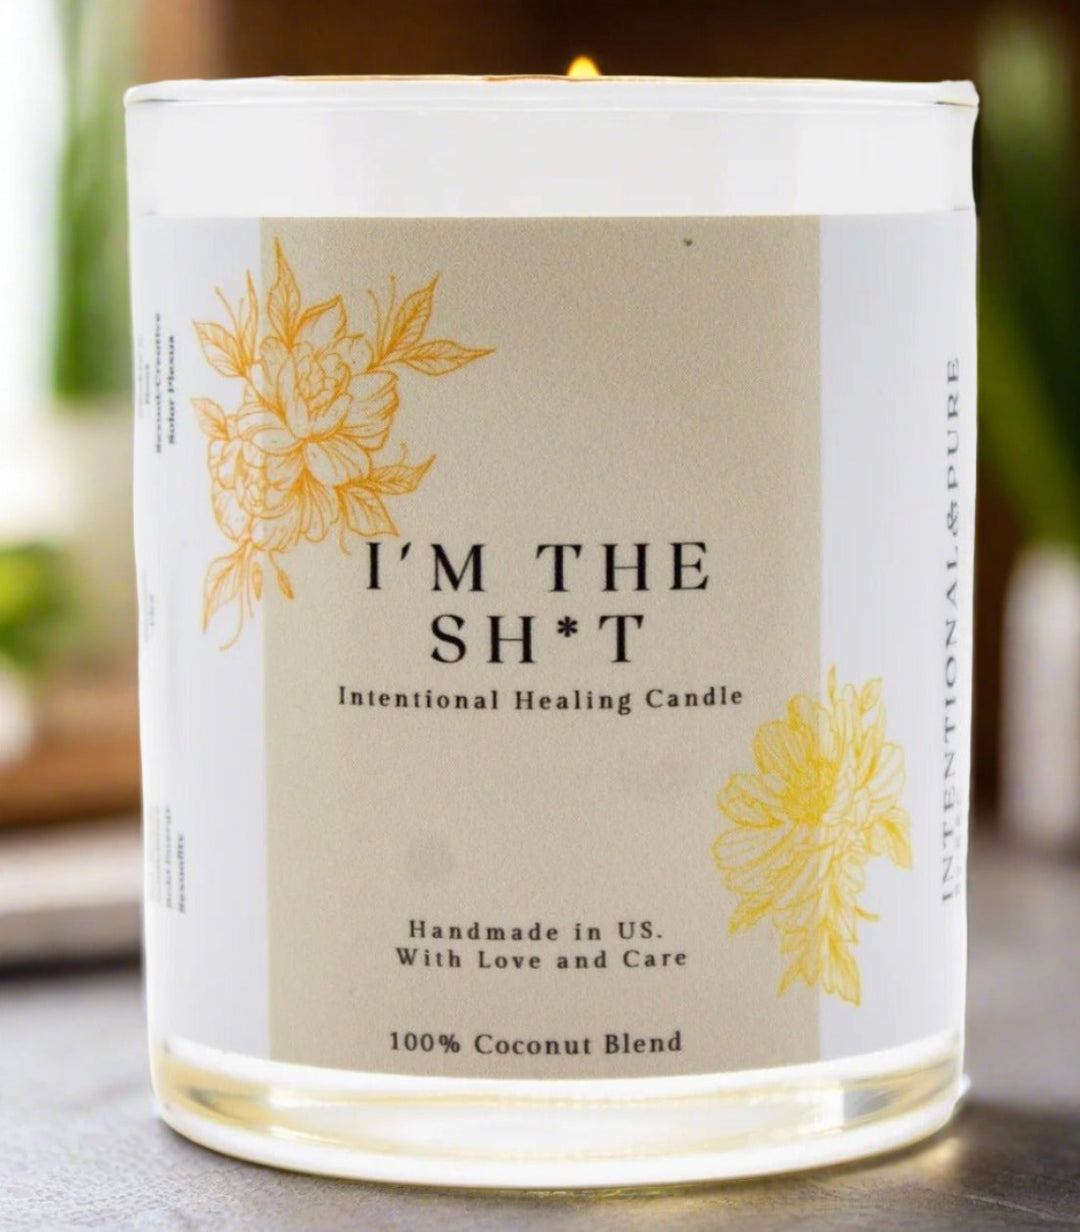 "I'm The Sh*t" Candle - The Village Retail